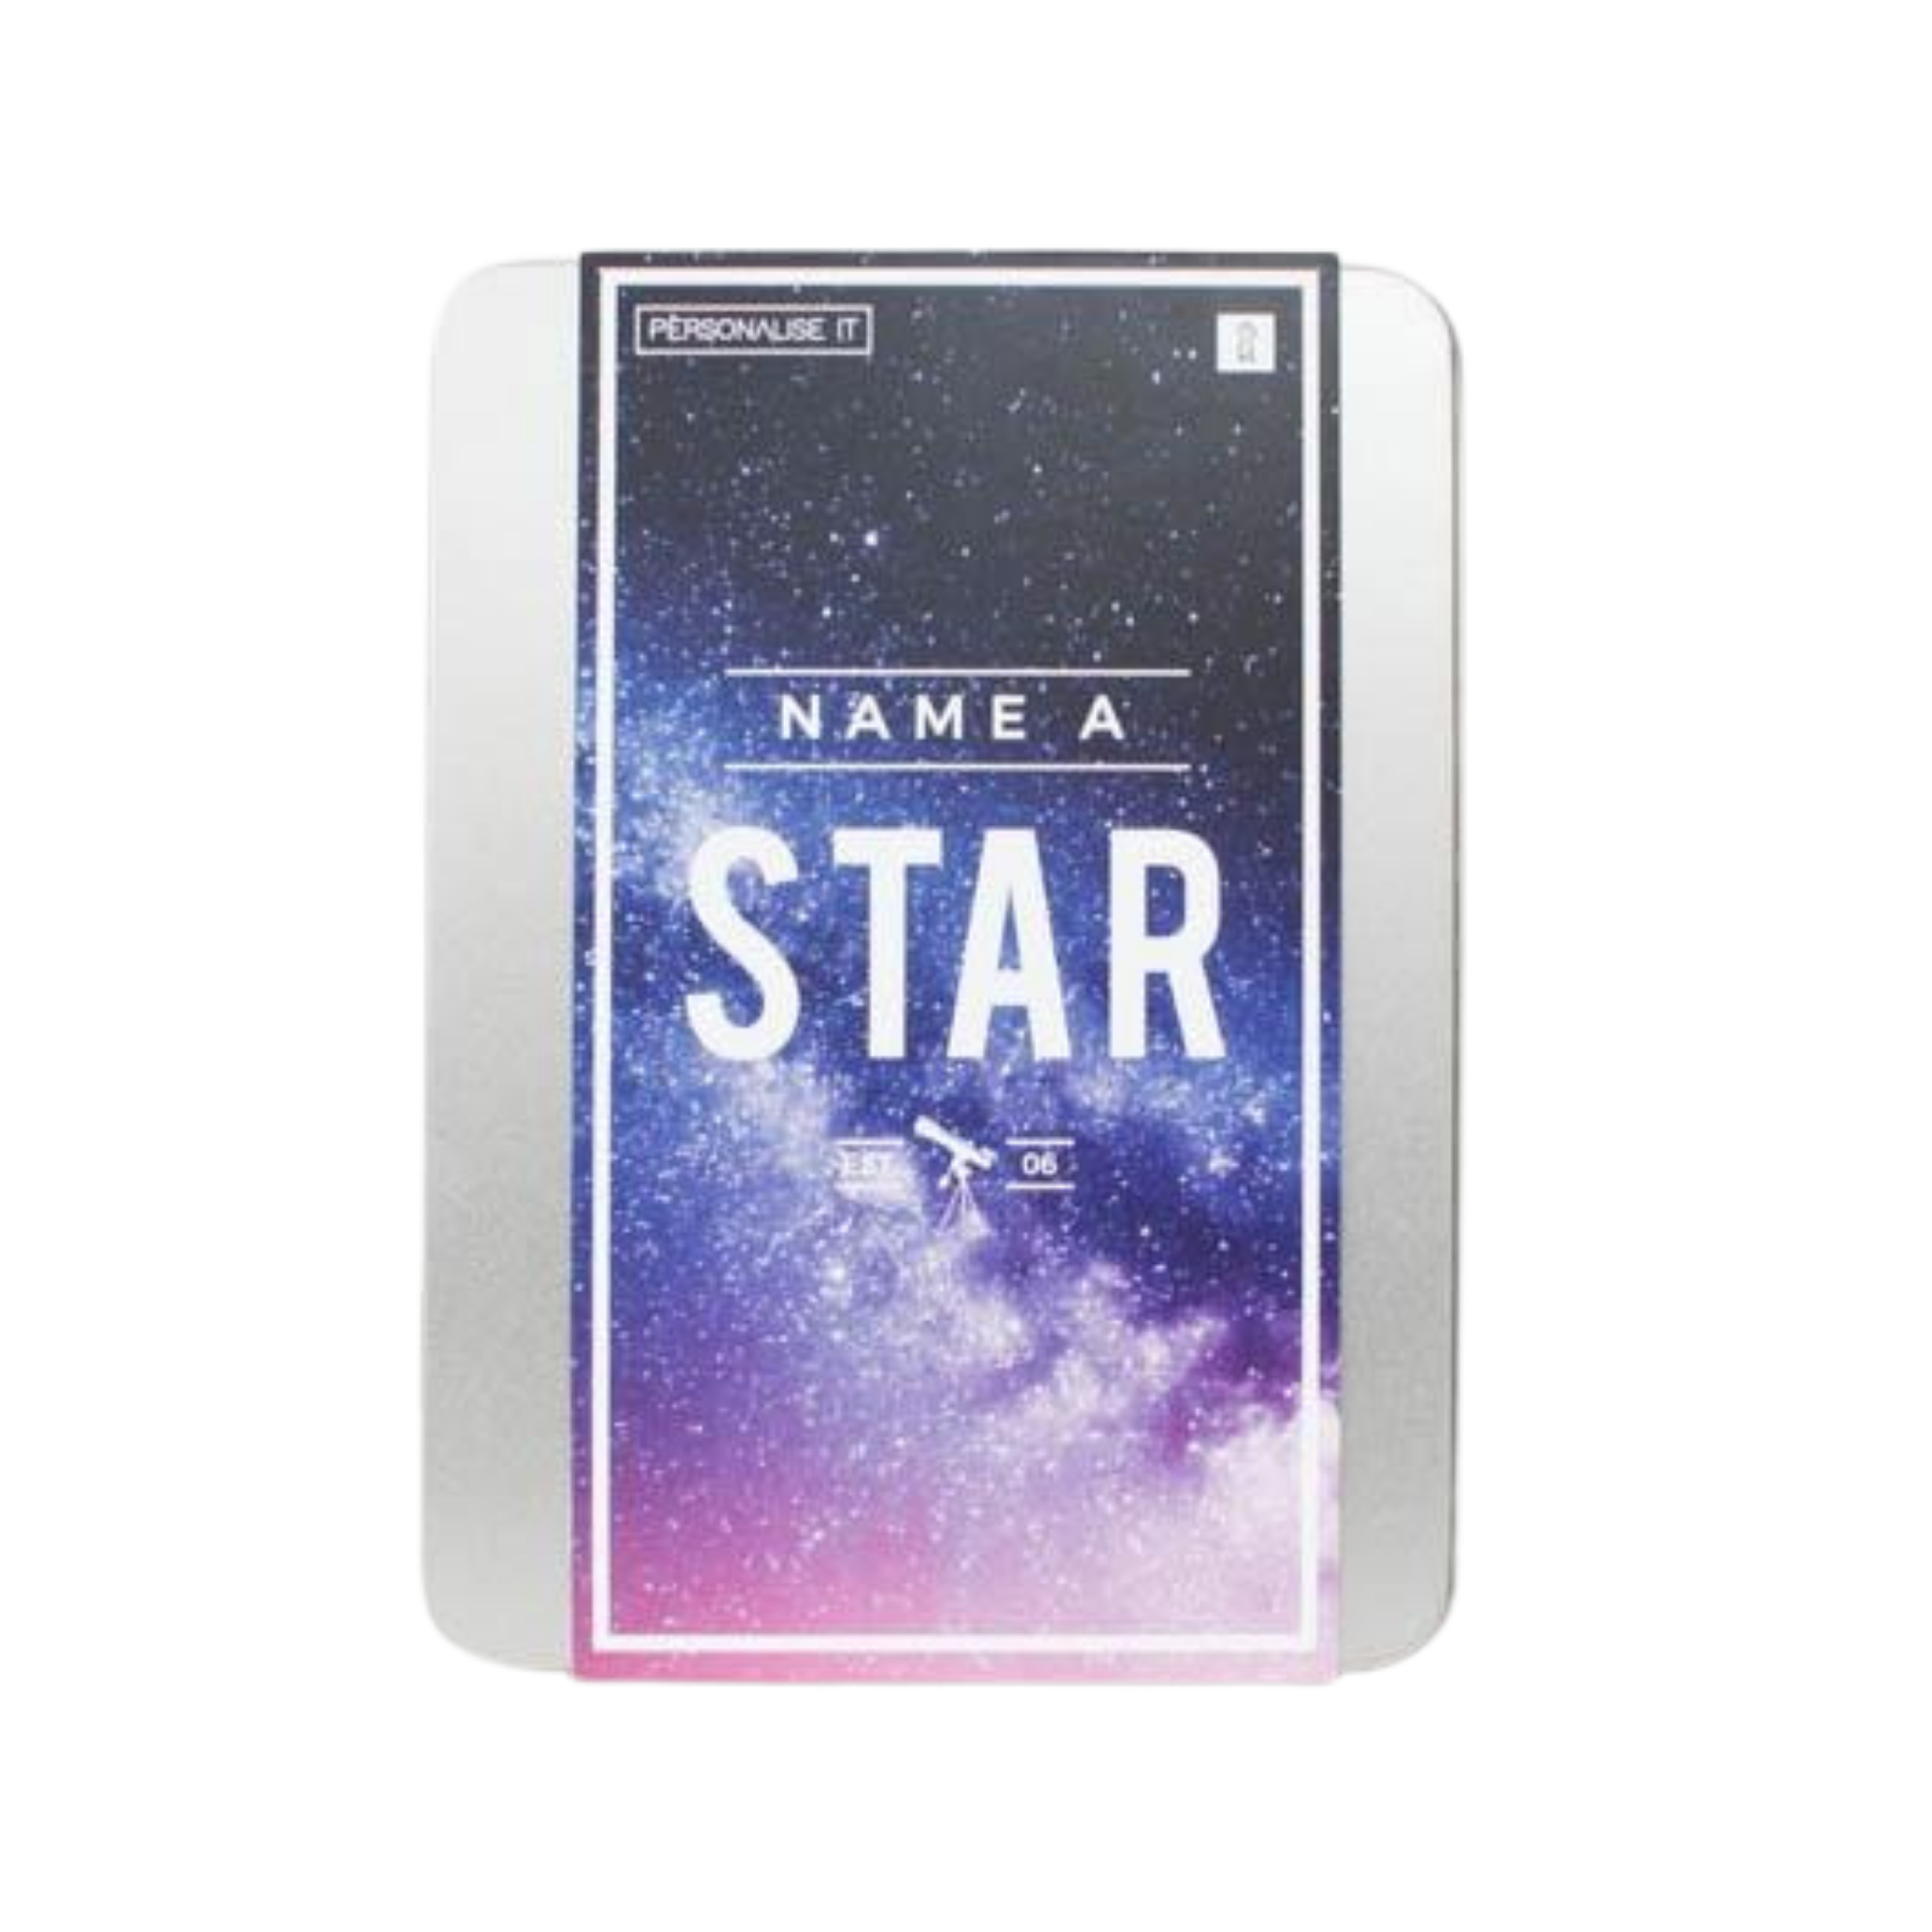 Name a Star - Downloadable Gift Set - Buy a Star Personalised Gift